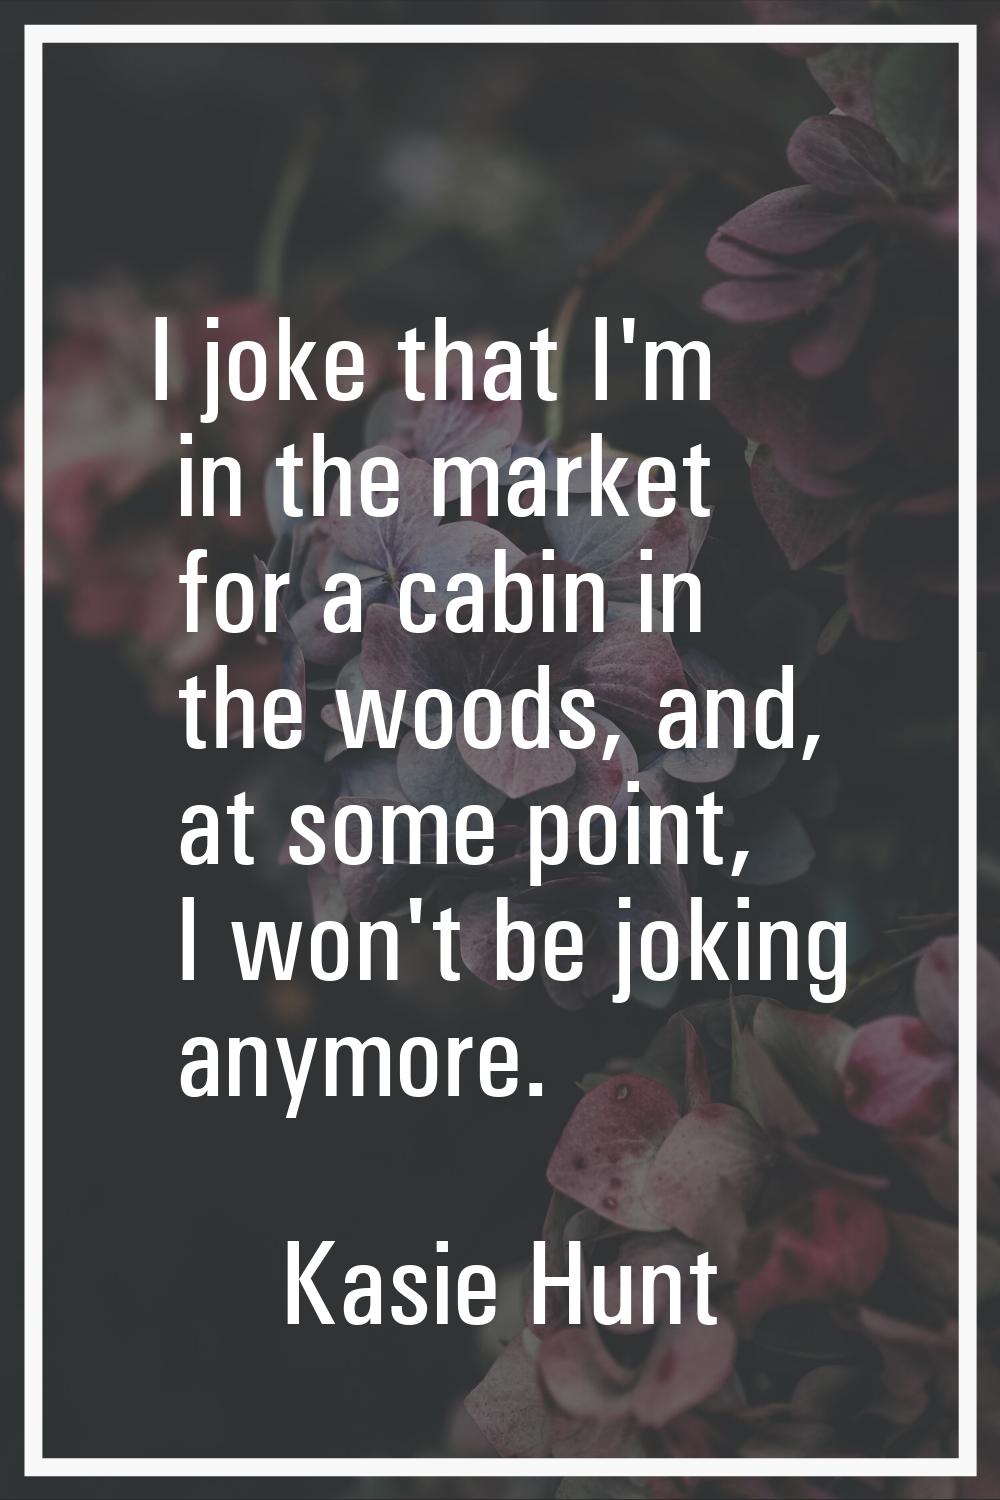 I joke that I'm in the market for a cabin in the woods, and, at some point, I won't be joking anymo